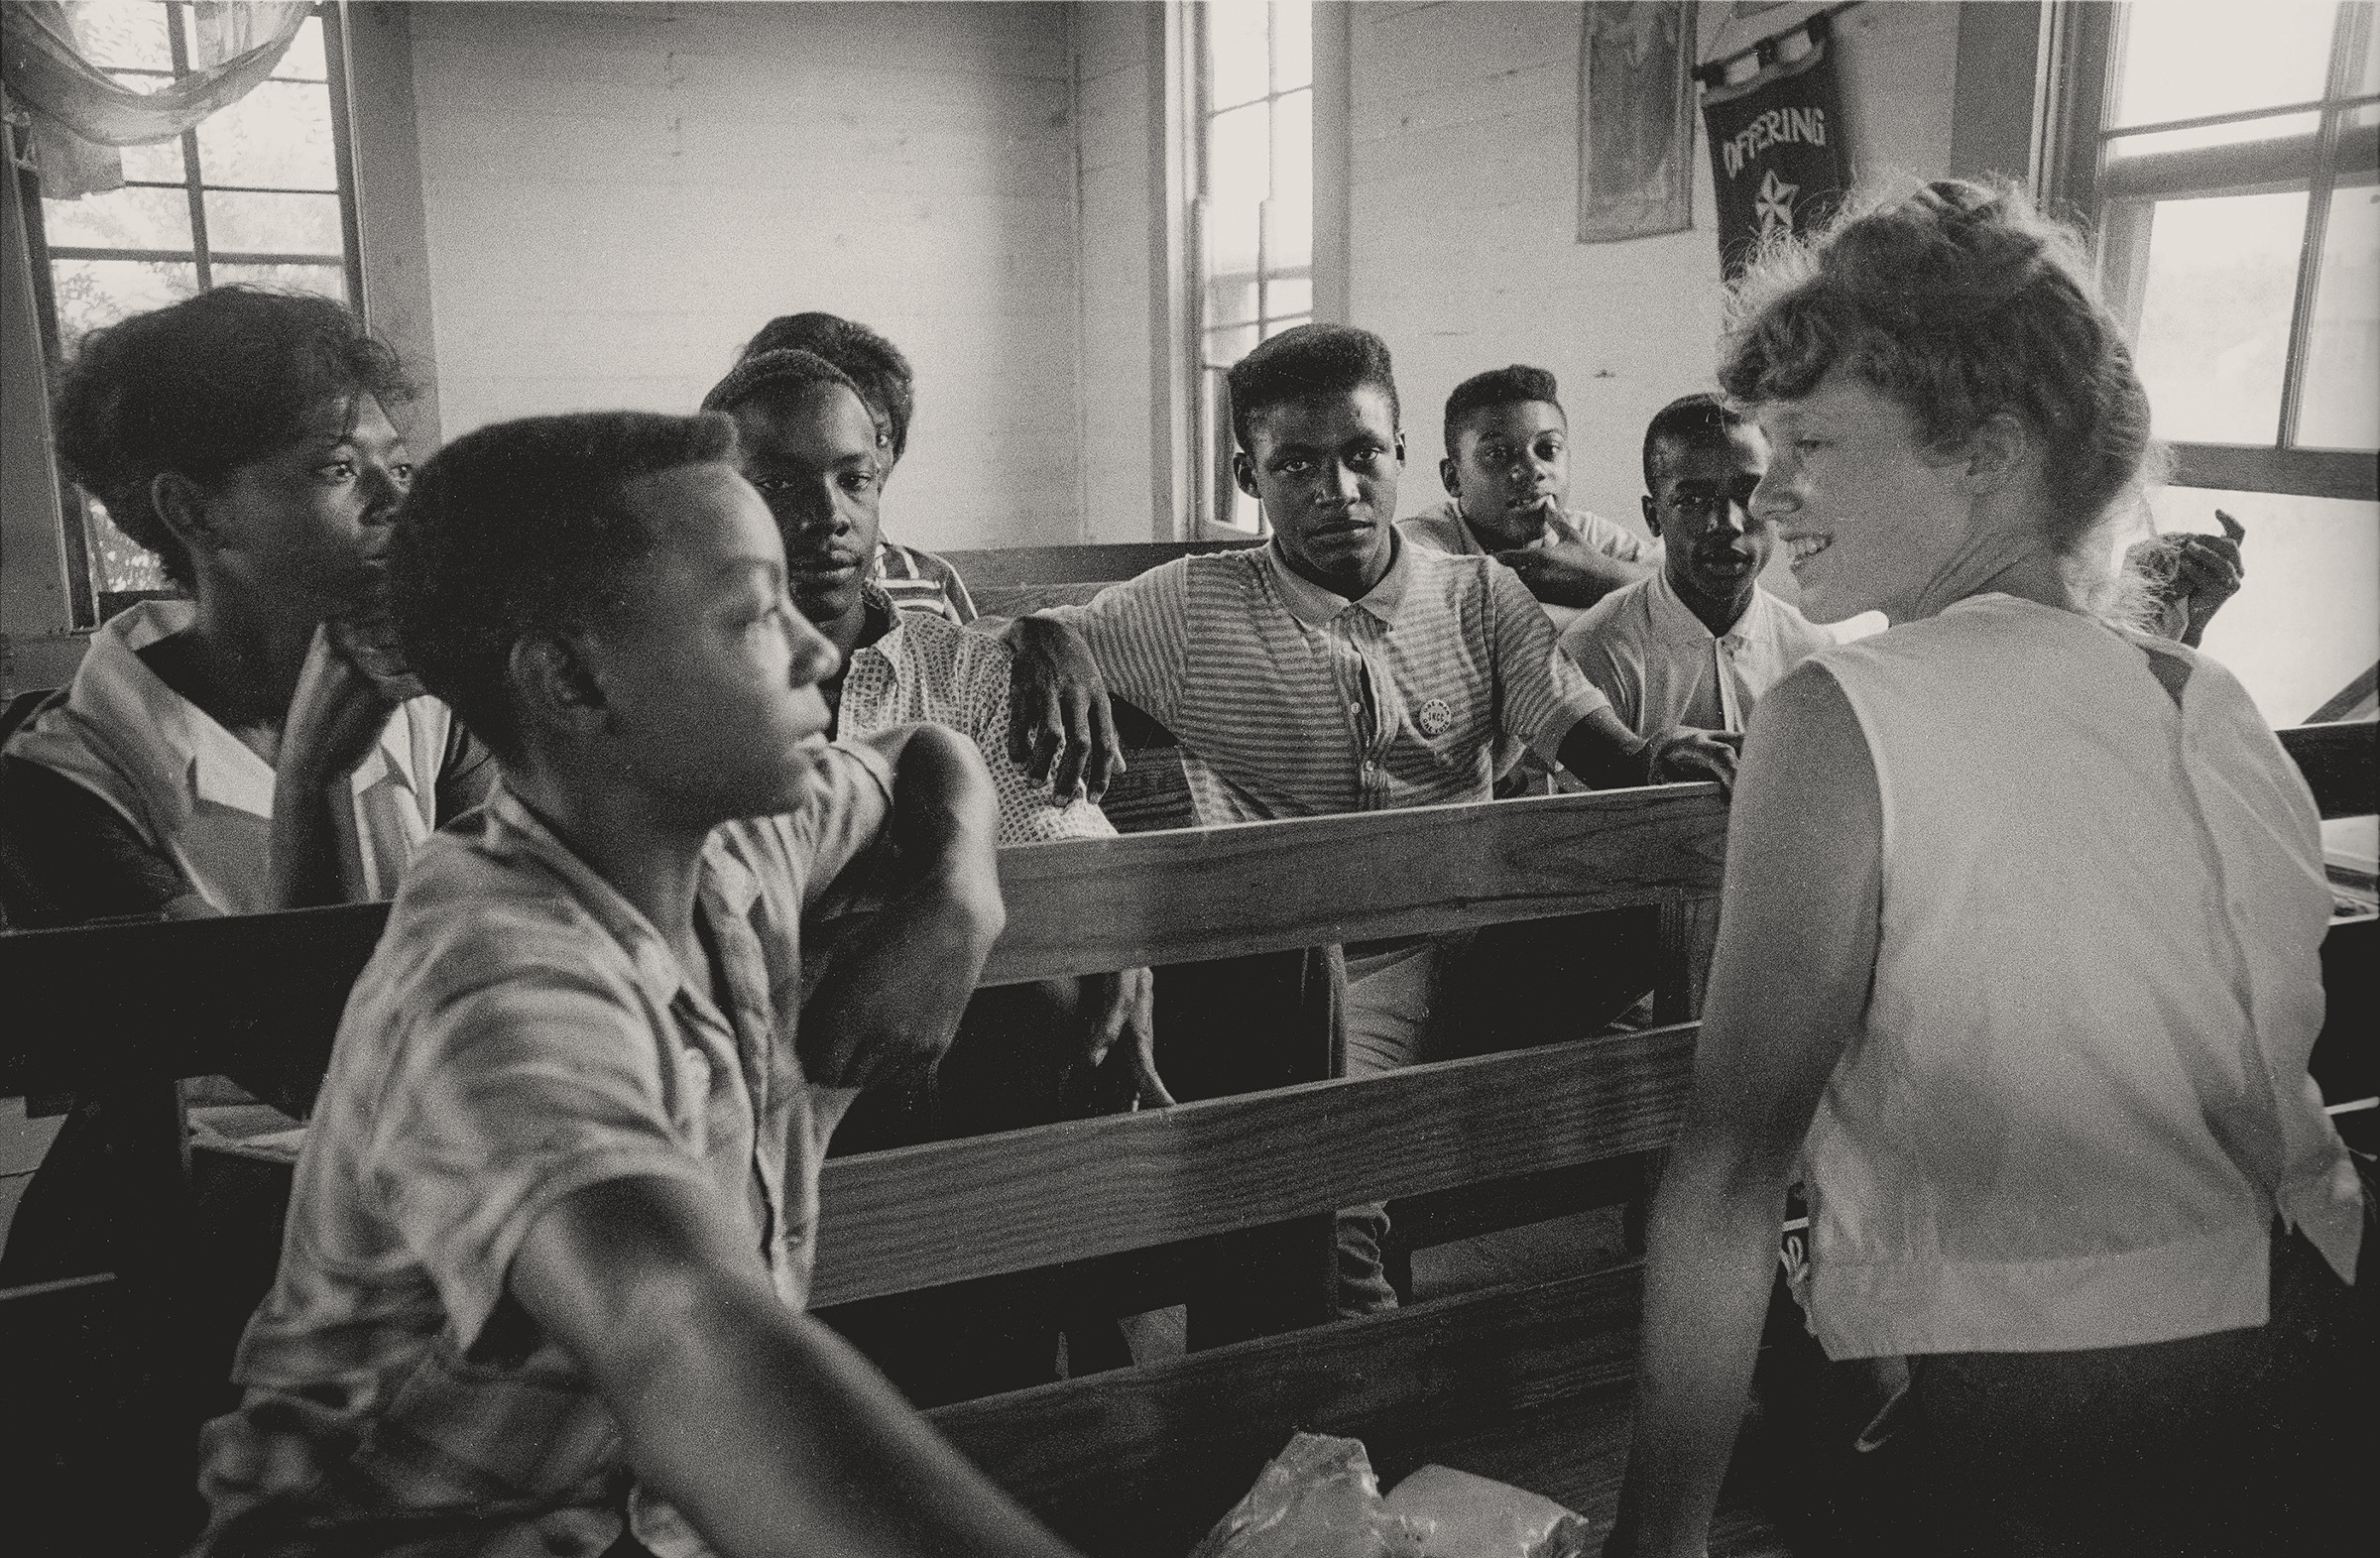 Freedom School, Mileston, Mississippi, August 1964. Photograph by Matt Herron. Edie Black, a volunteer from Smith College, teaches at a Freedom School in Mileston, a community of independent Black farmers in the Mississippi Delta. © 1976, Matt Herron / Photograph provided by TakeStock.